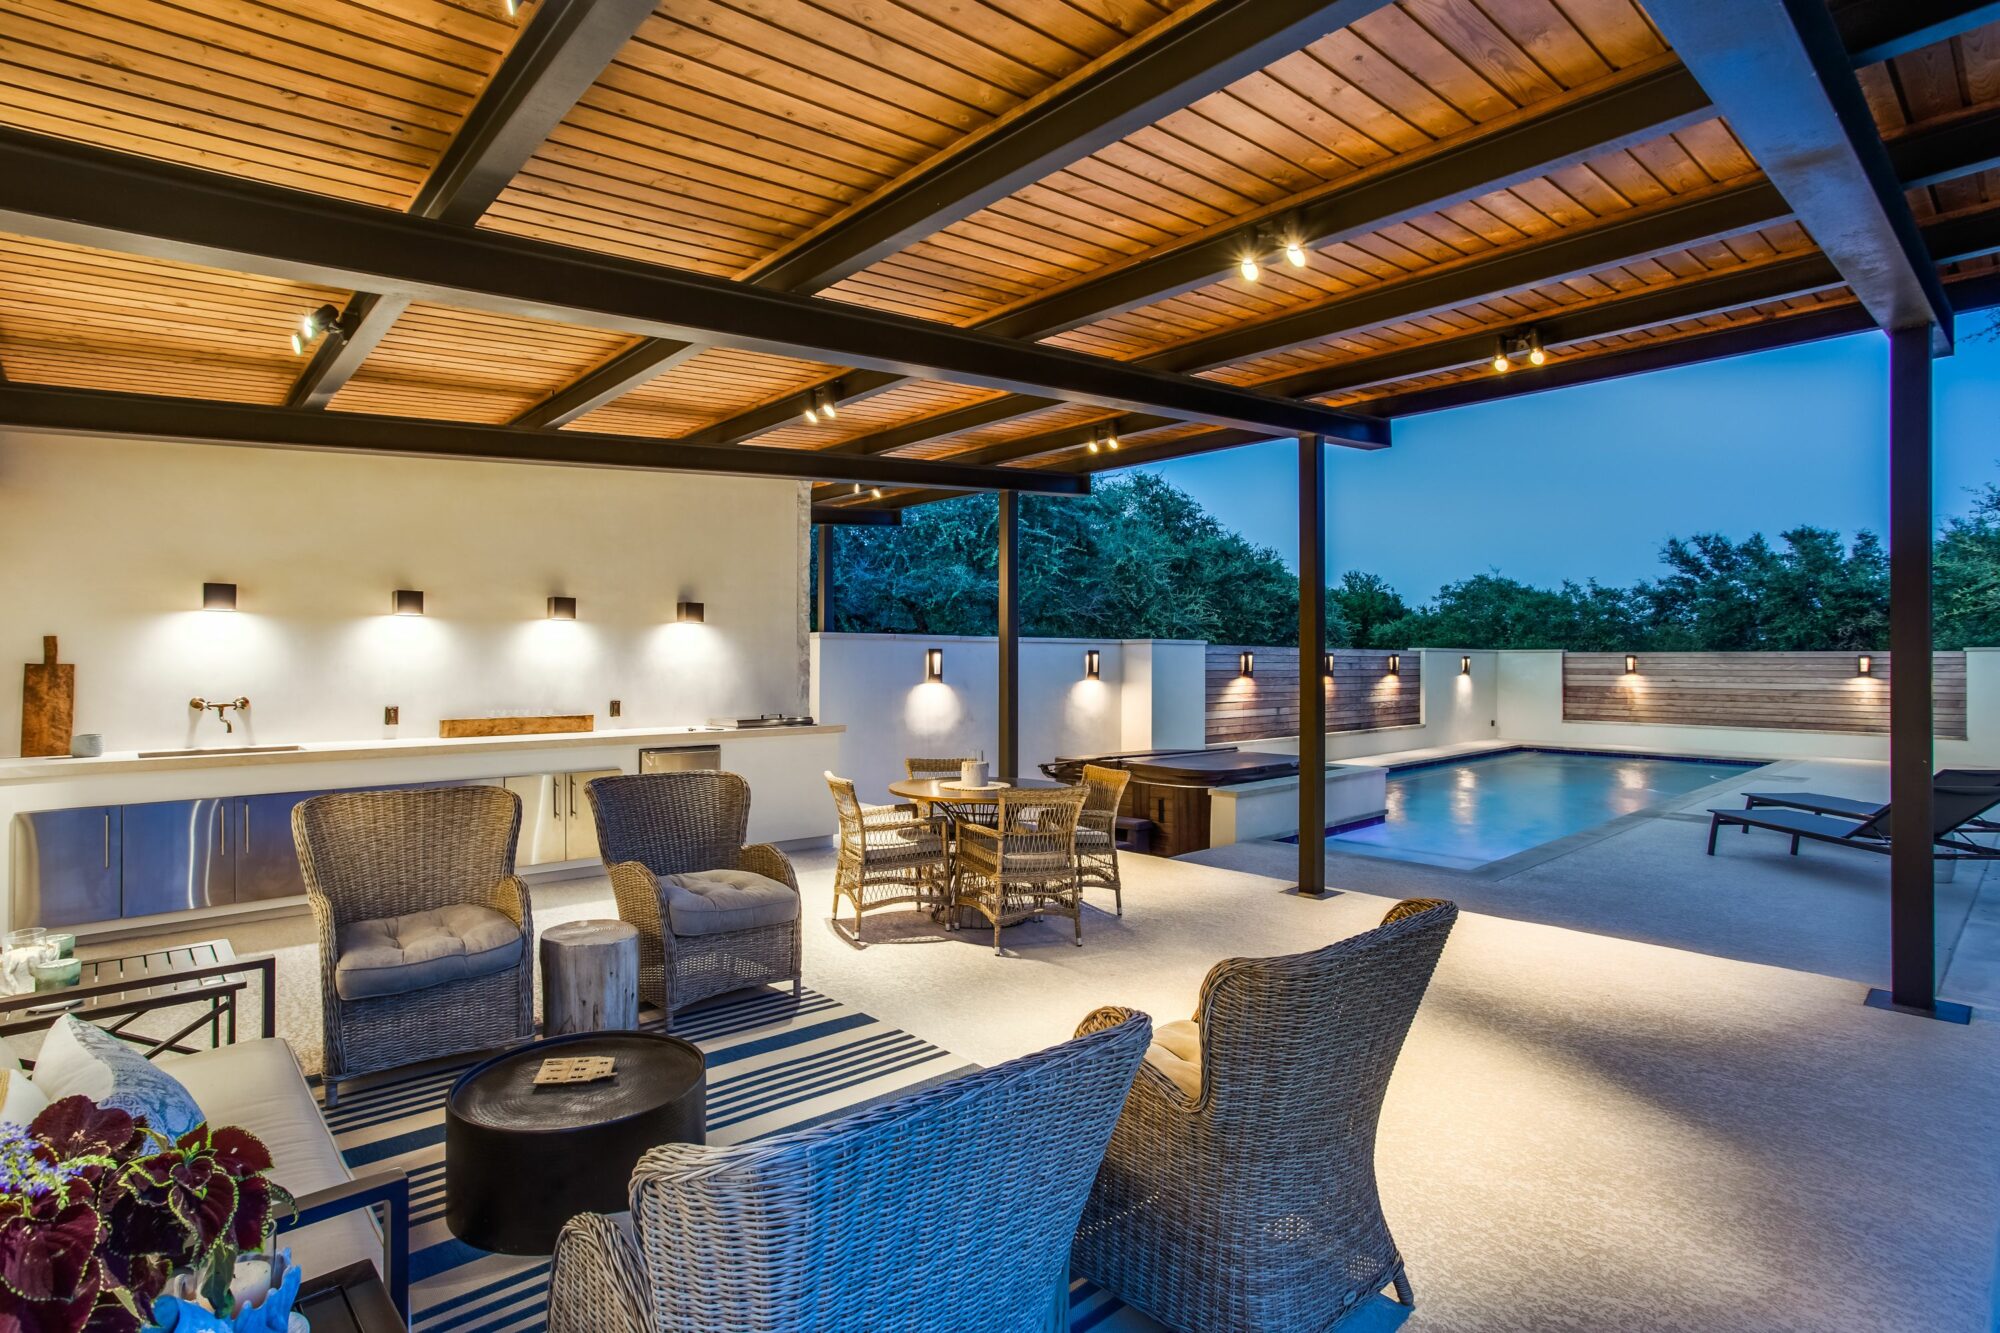 Outdoor covered living area with pool